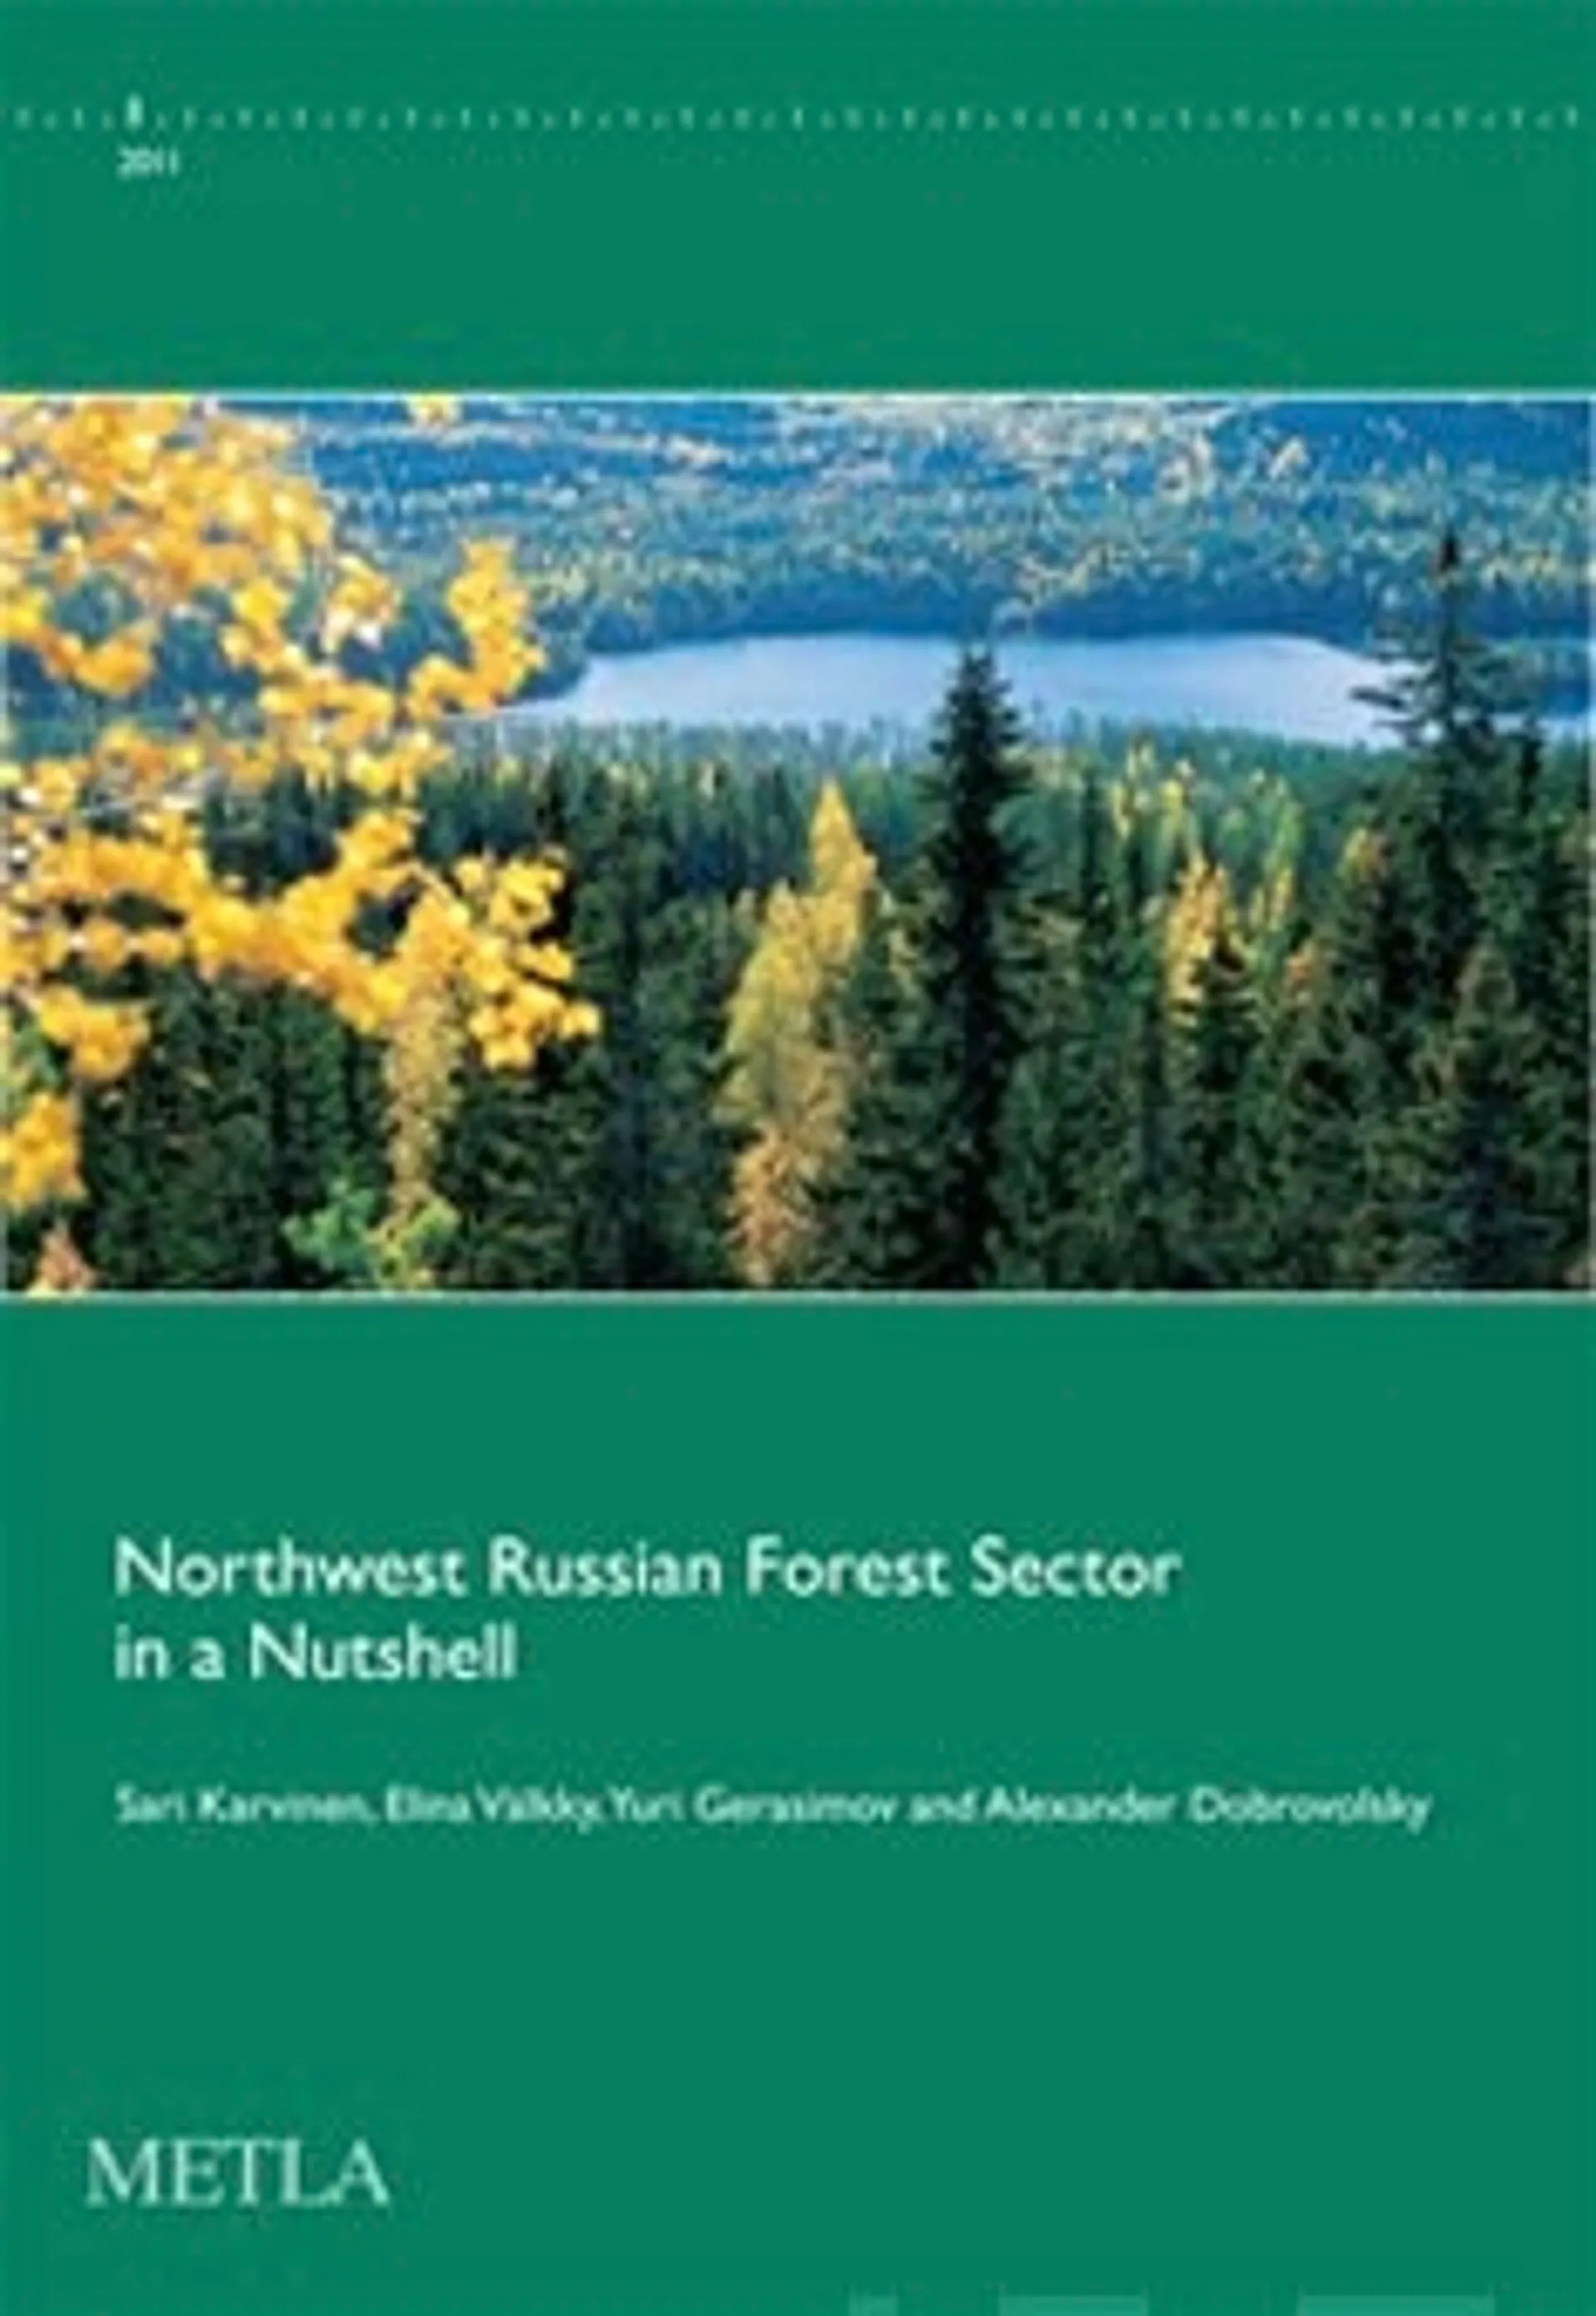 Northwest Russian Forest Sector in a Nutshell